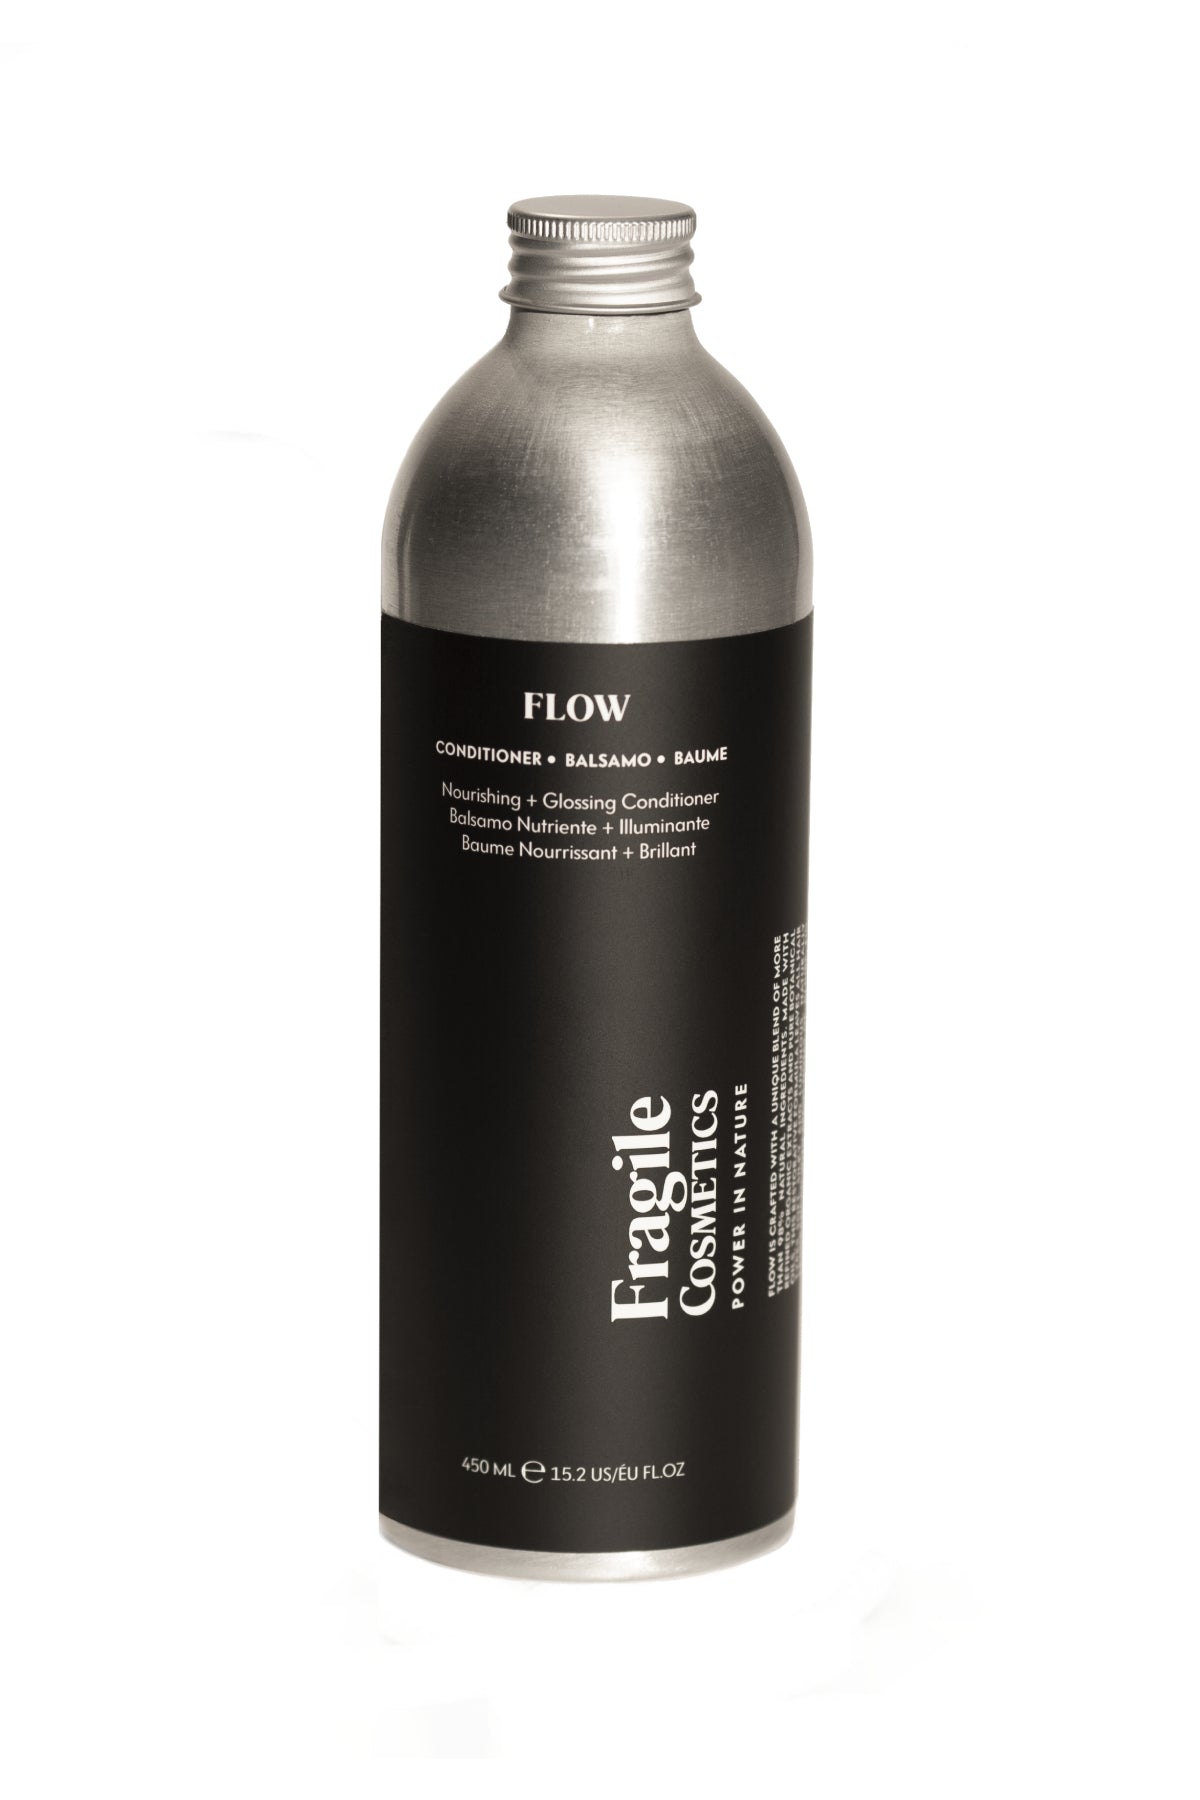 FLOW nourishing and smoothing conditioner